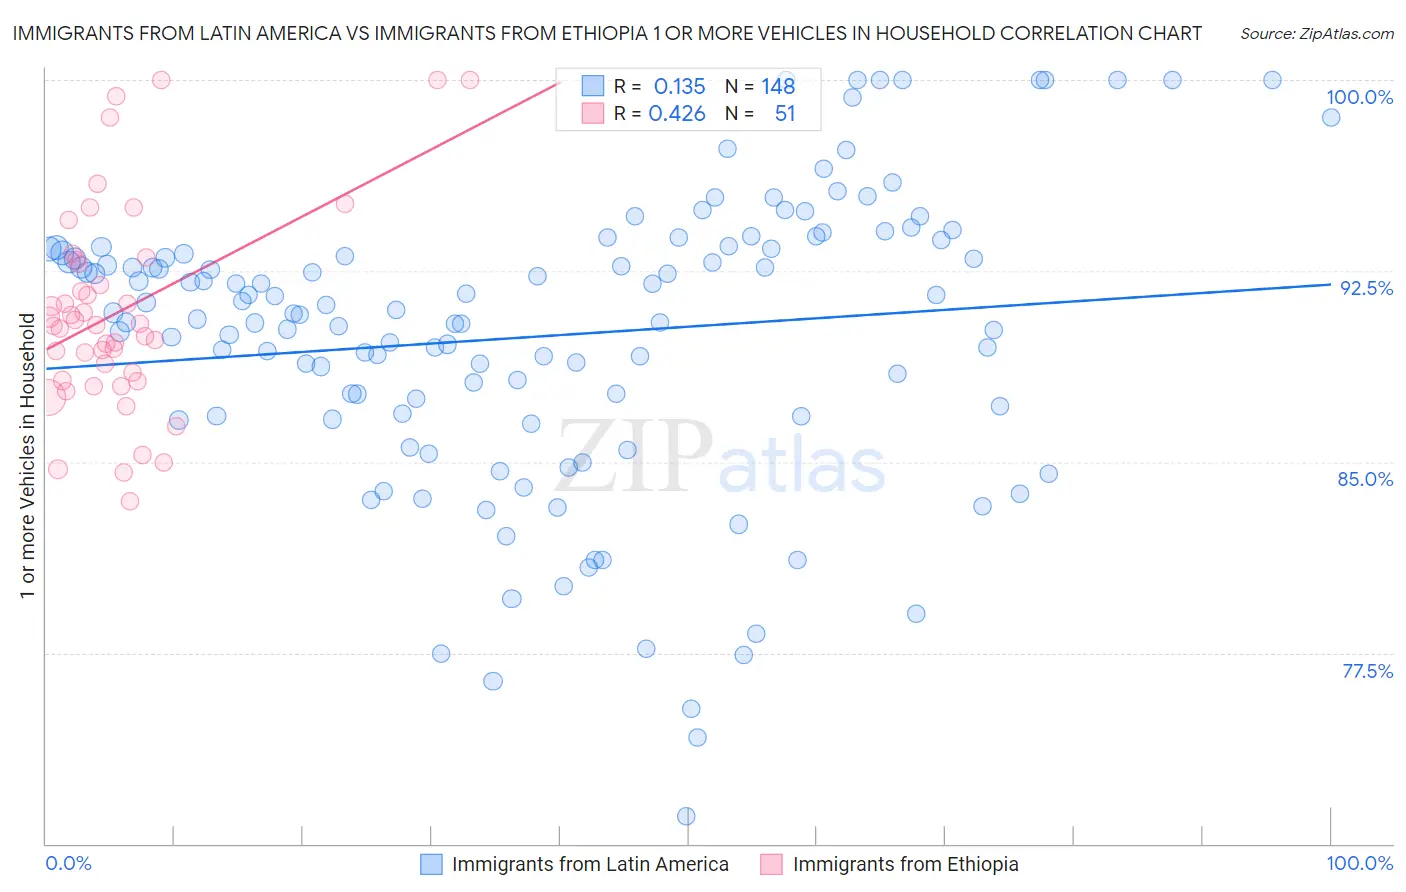 Immigrants from Latin America vs Immigrants from Ethiopia 1 or more Vehicles in Household